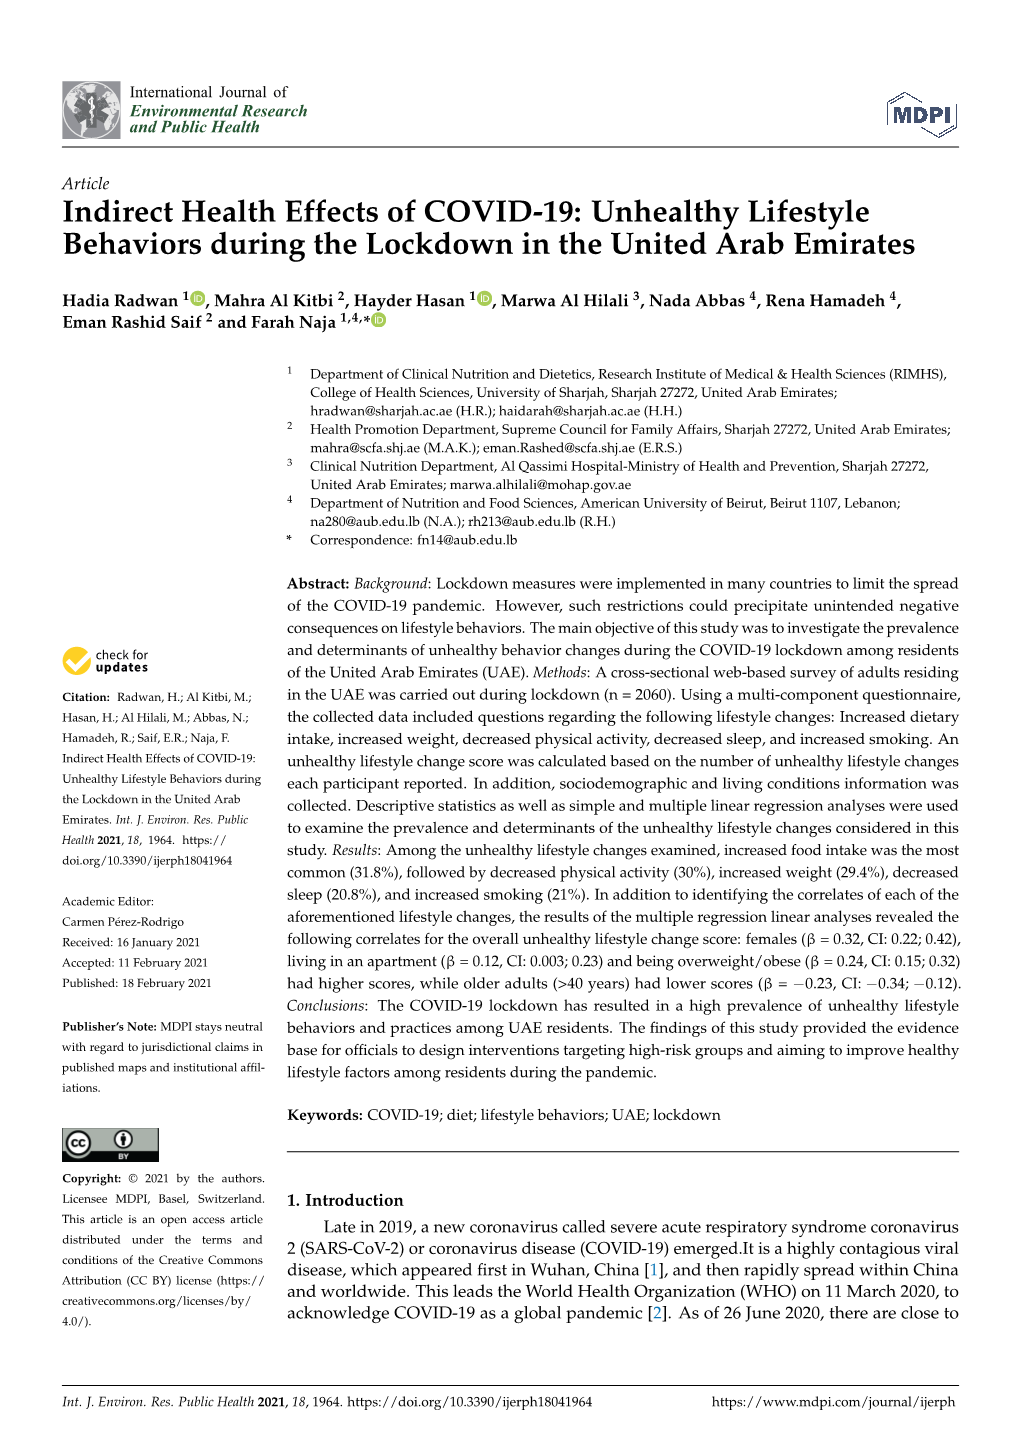 Indirect Health Effects of COVID-19: Unhealthy Lifestyle Behaviors During the Lockdown in the United Arab Emirates